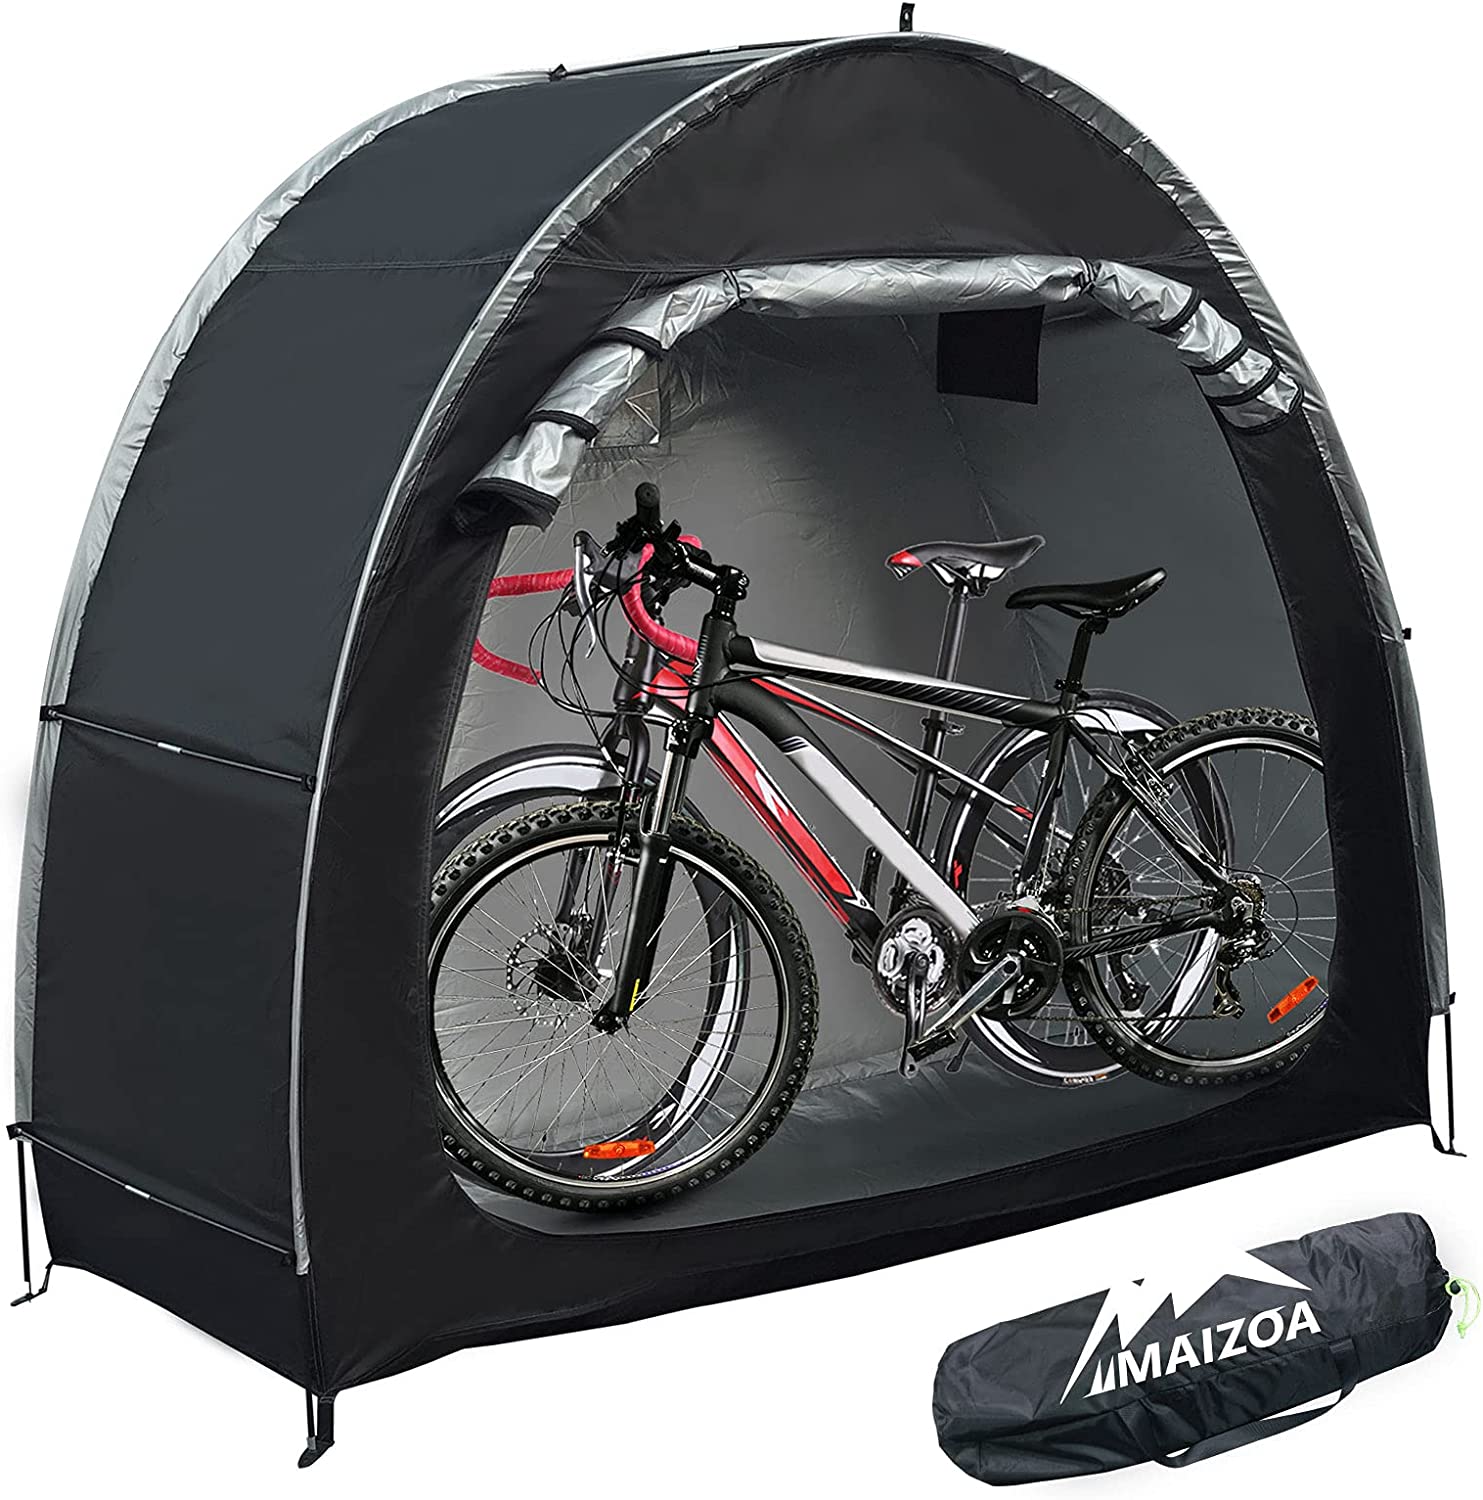 Review of MAIZOA Outdoor Bike Covers/ Storage Shed Tent, storage of 2 bicycles